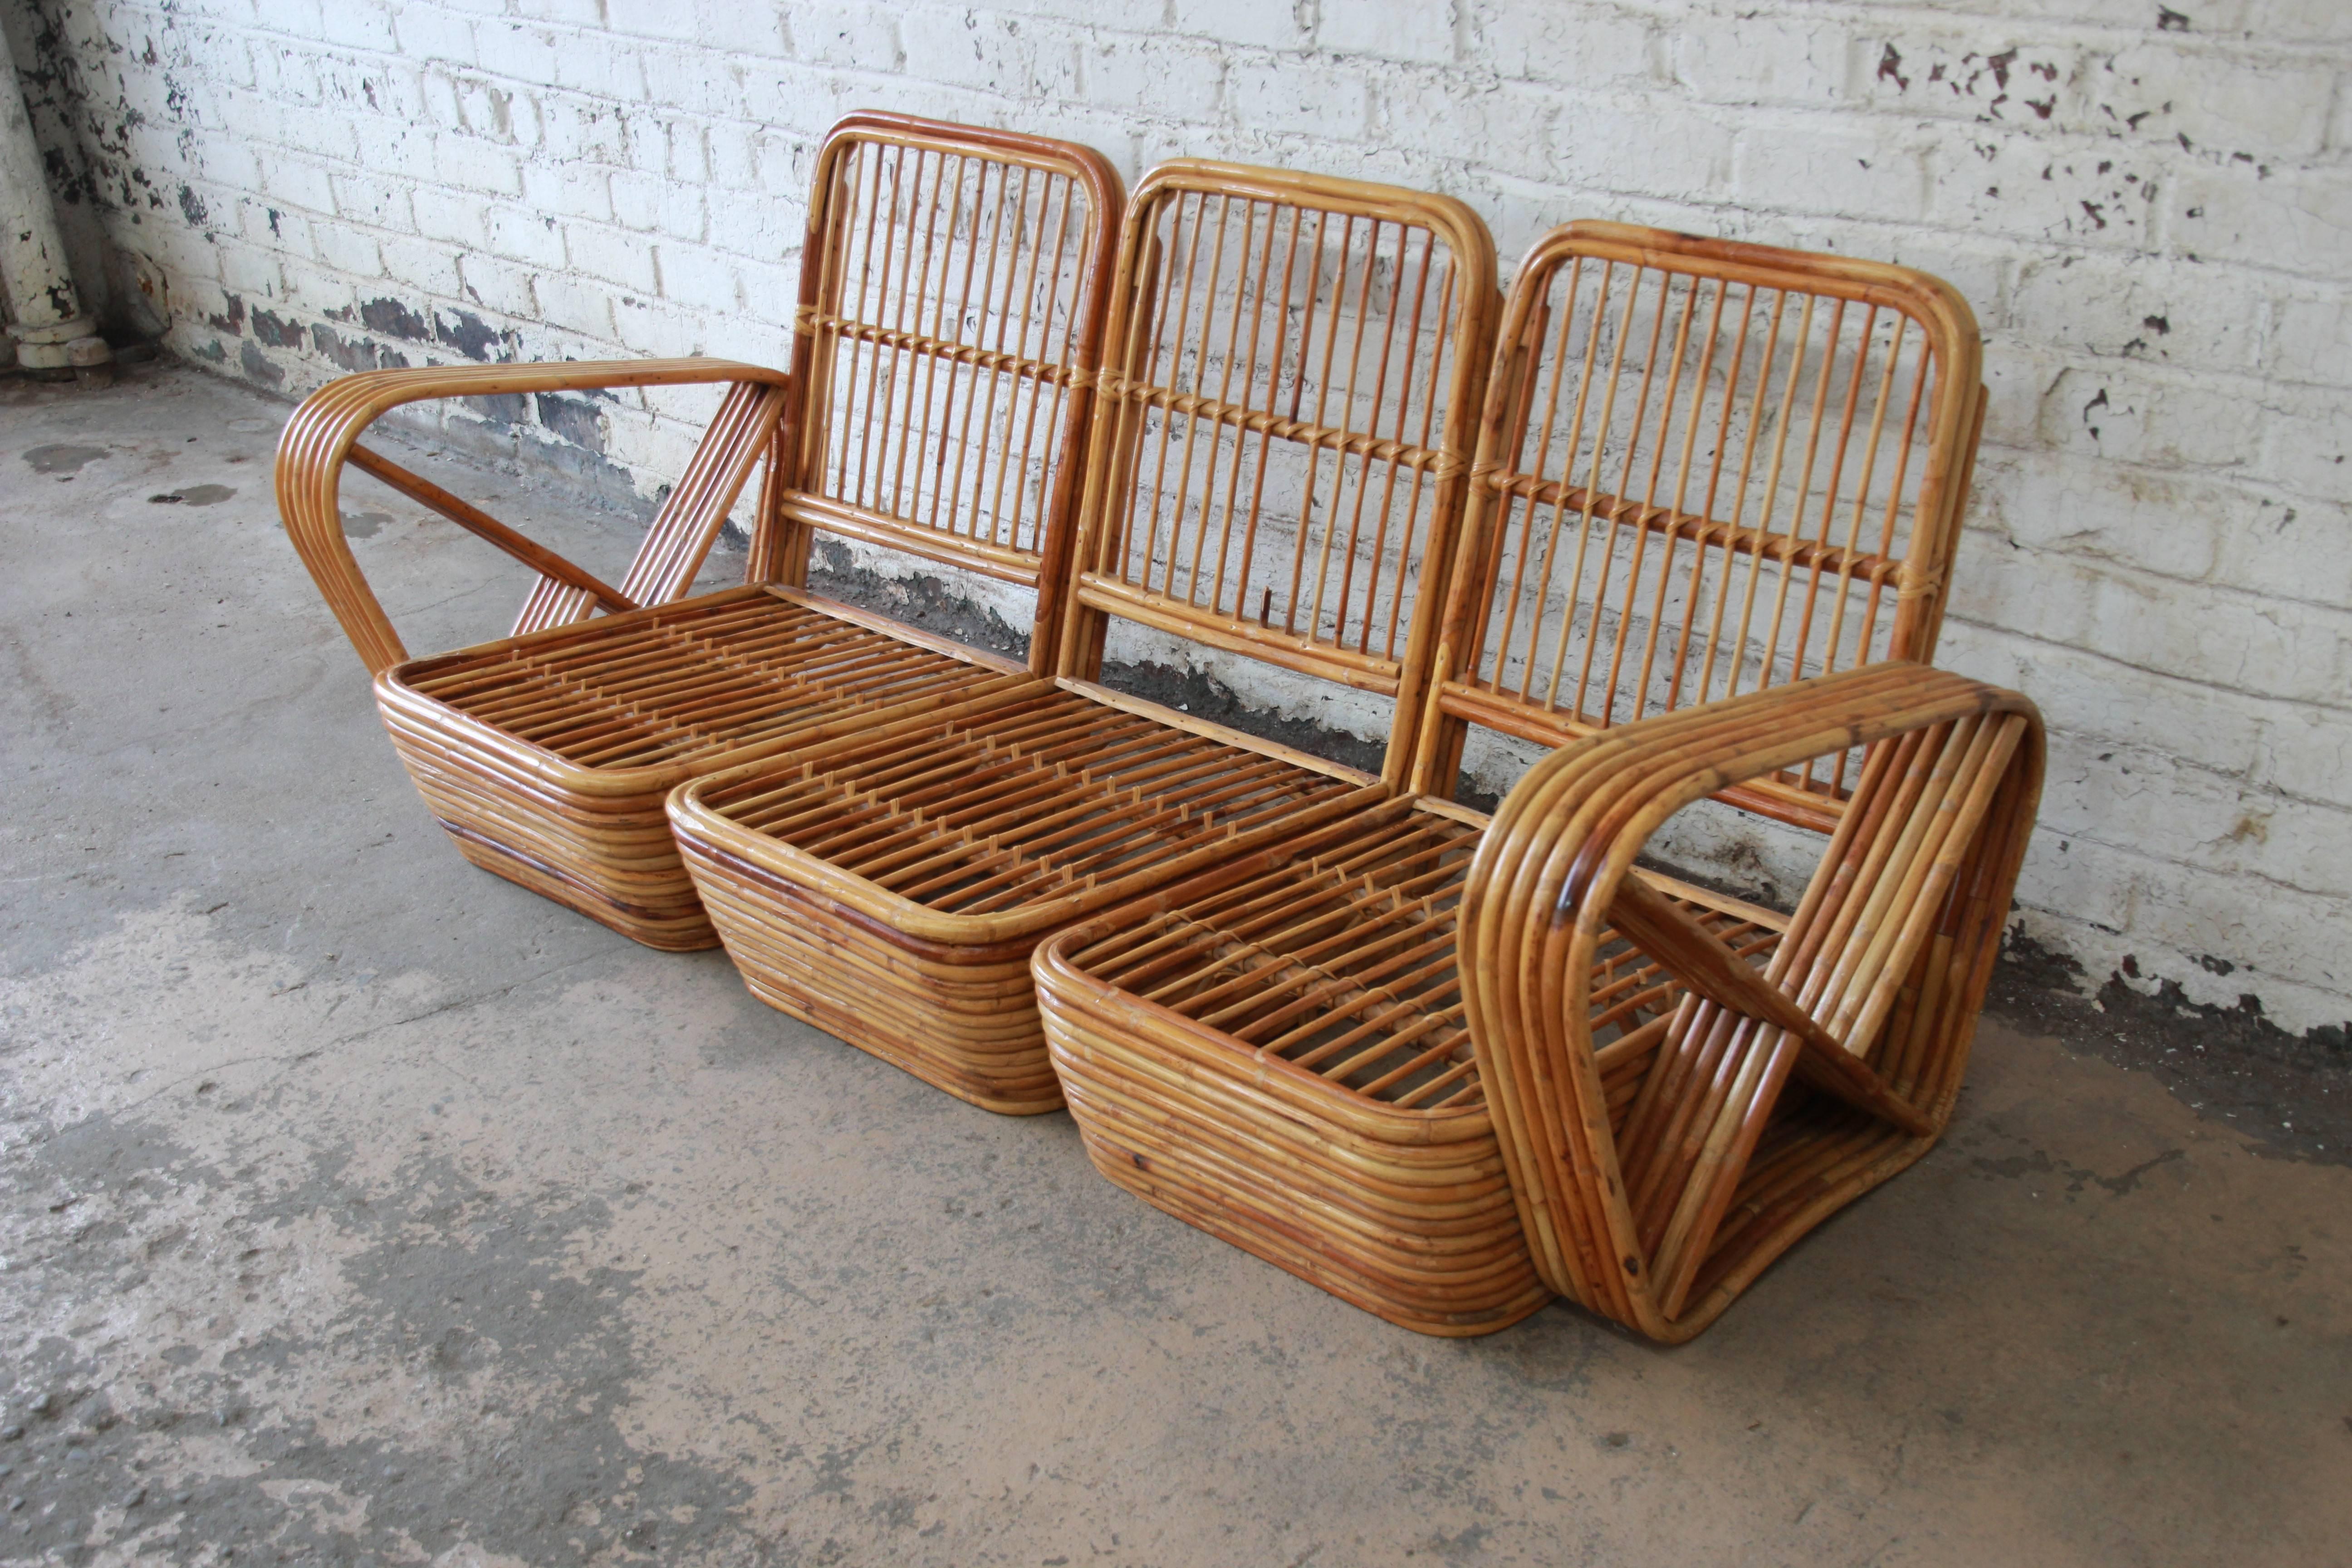 A very nice bamboo Pretzel sofa attributed to Paul Frankl. The sofa features an unmistakable six-strand pretzel design. The rattan is in good condition with normal wear from age and use. The upholstery is clean with a floral landscape design and the